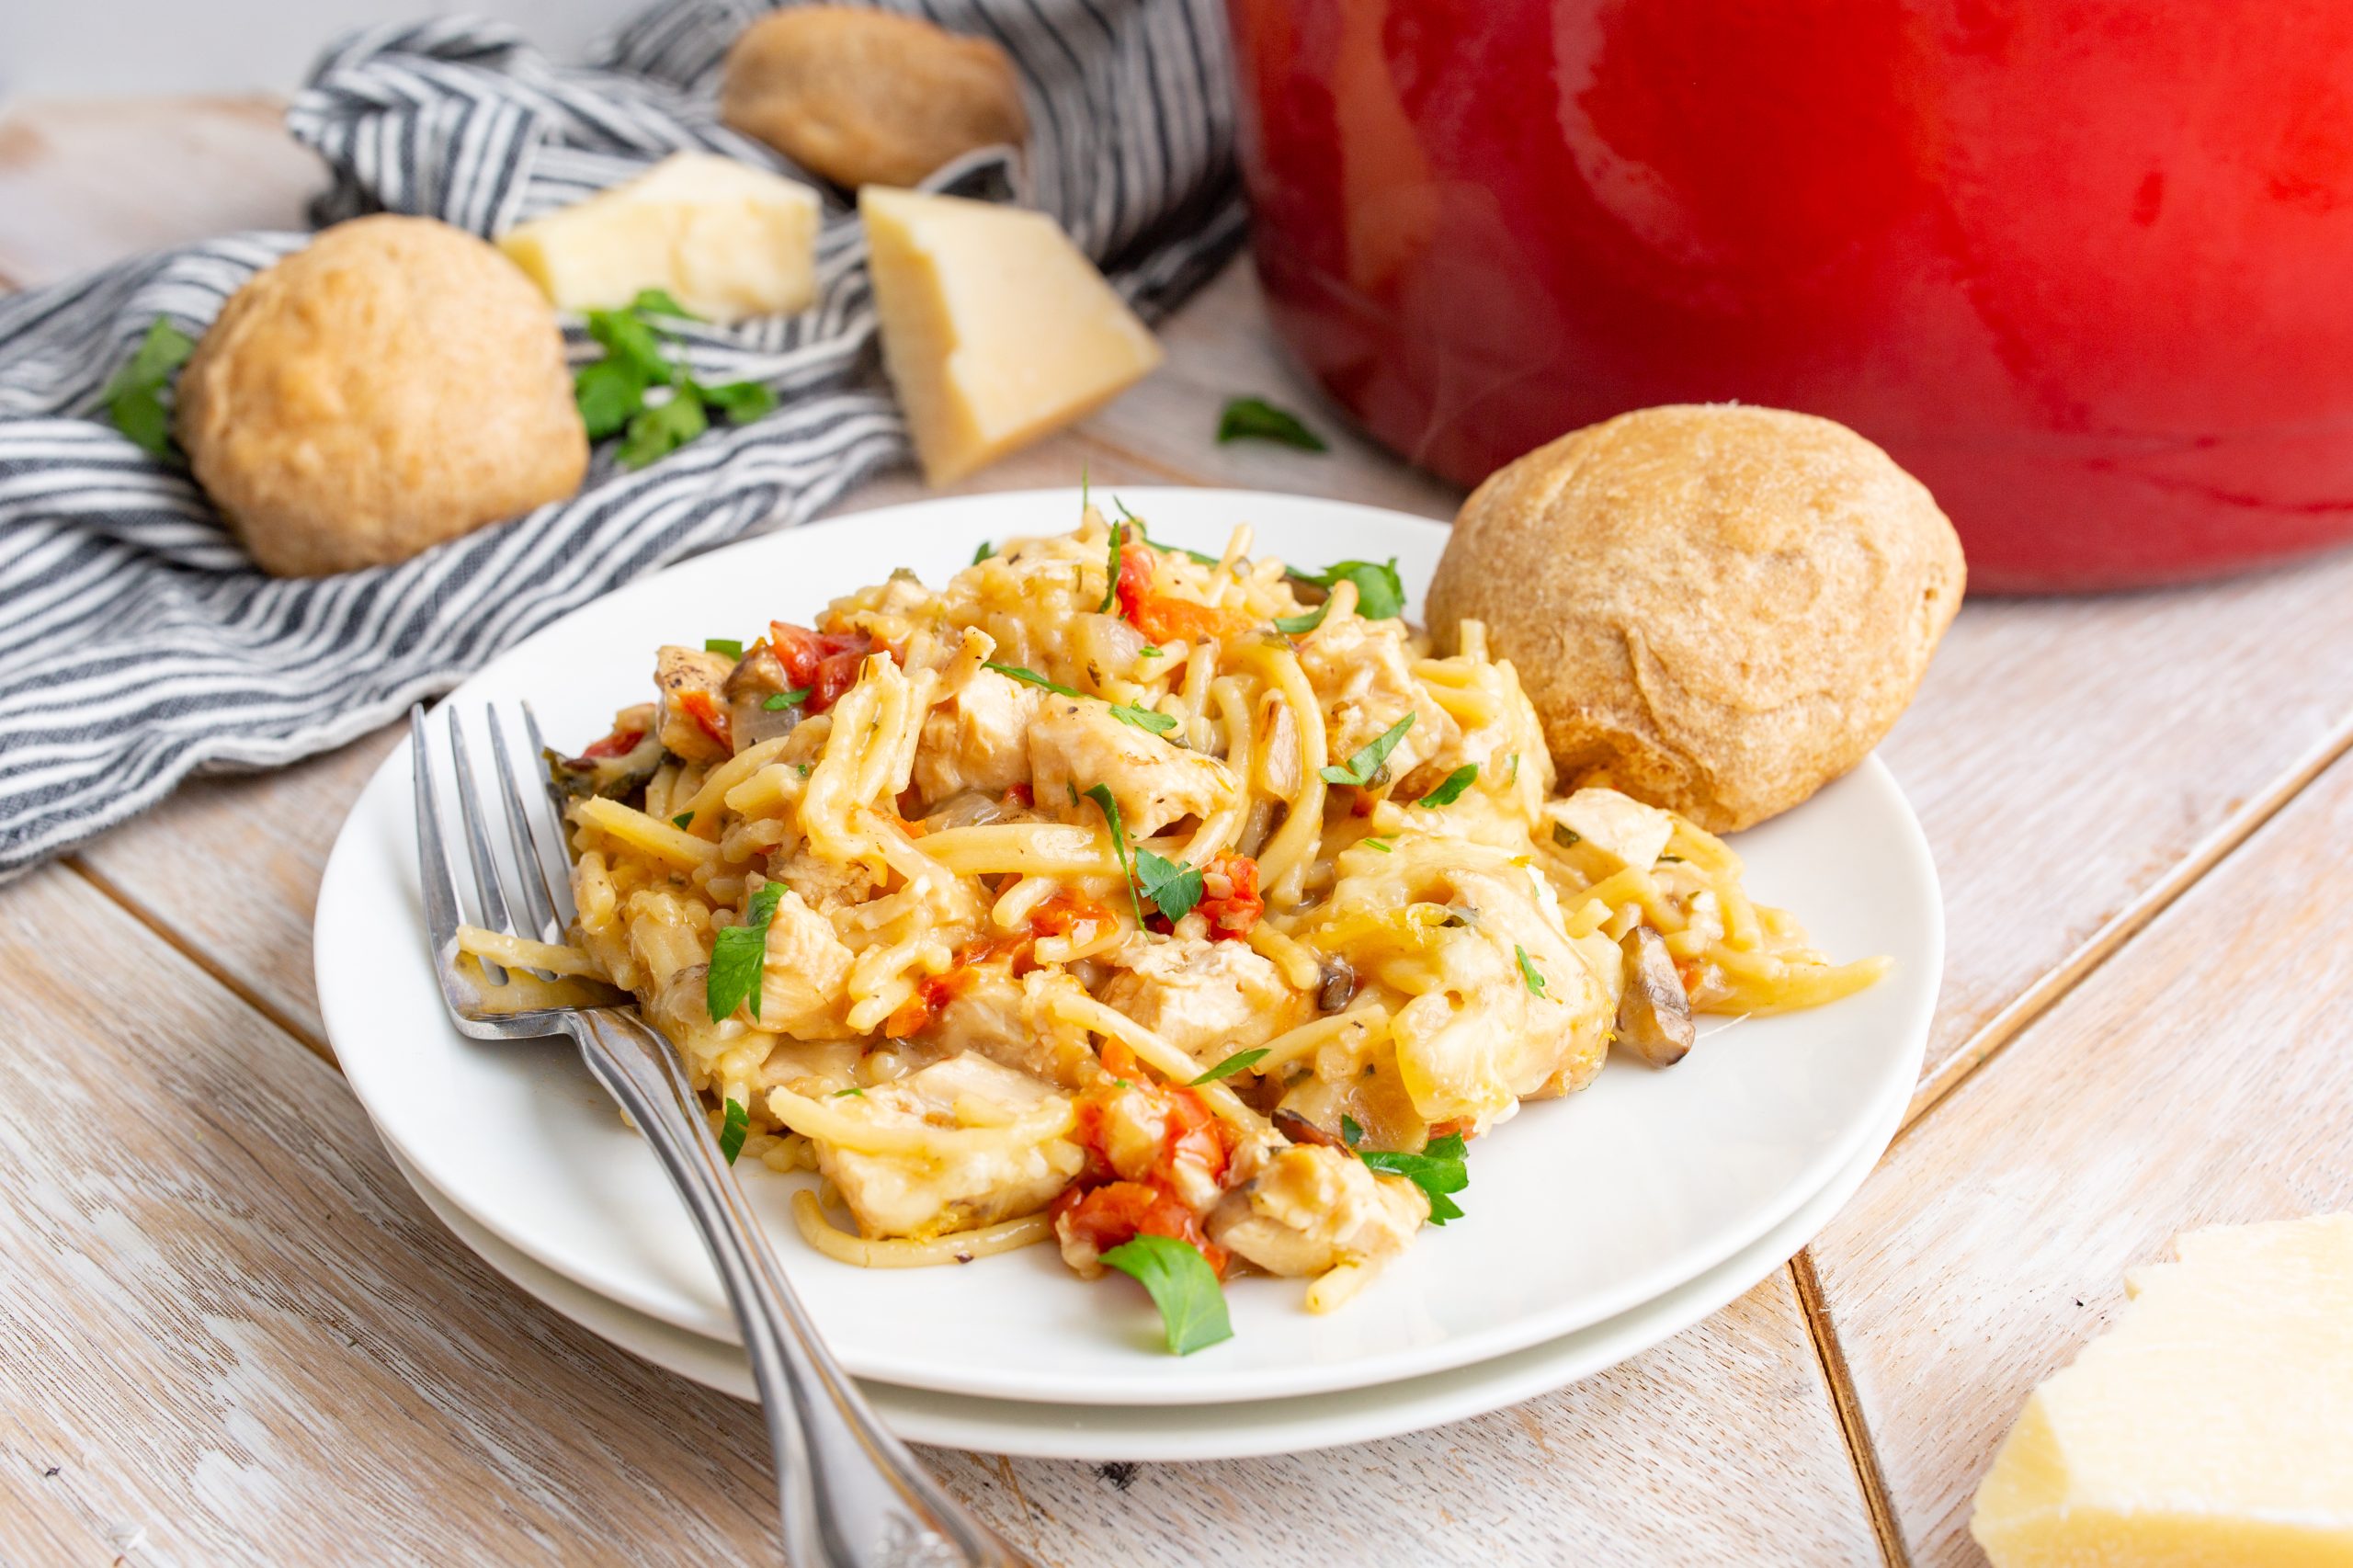 A plate of pasta mixed with vegetables and sauce, garnished with herbs. A fork rests on the plate, and a roll of bread is beside the dish. In the background, there are potatoes and a red pot.